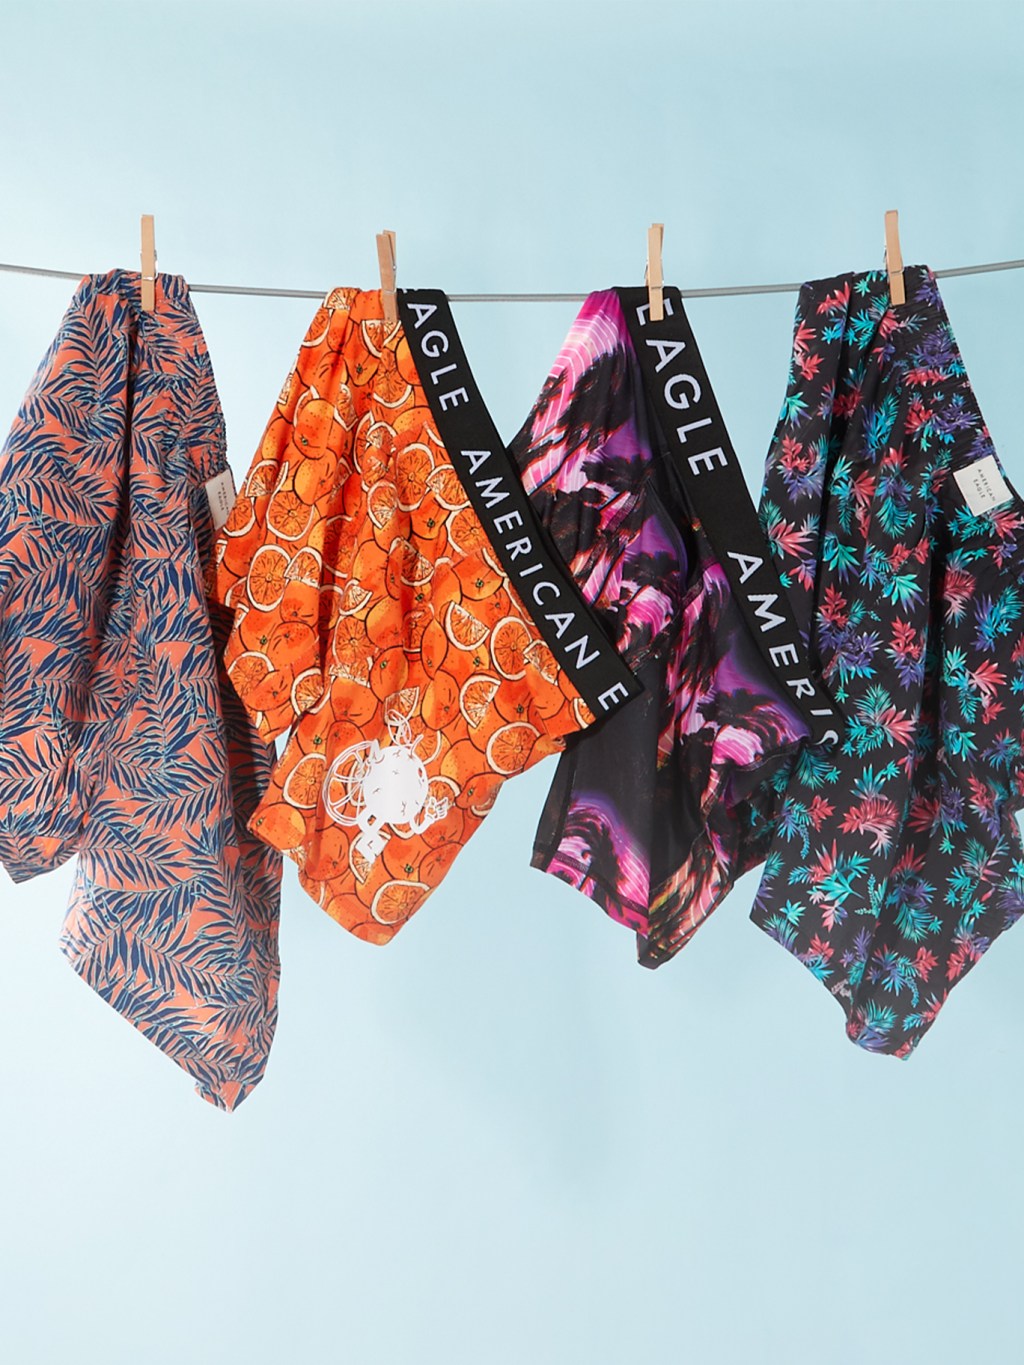 american eagle men's boxers hanging on a clothesline